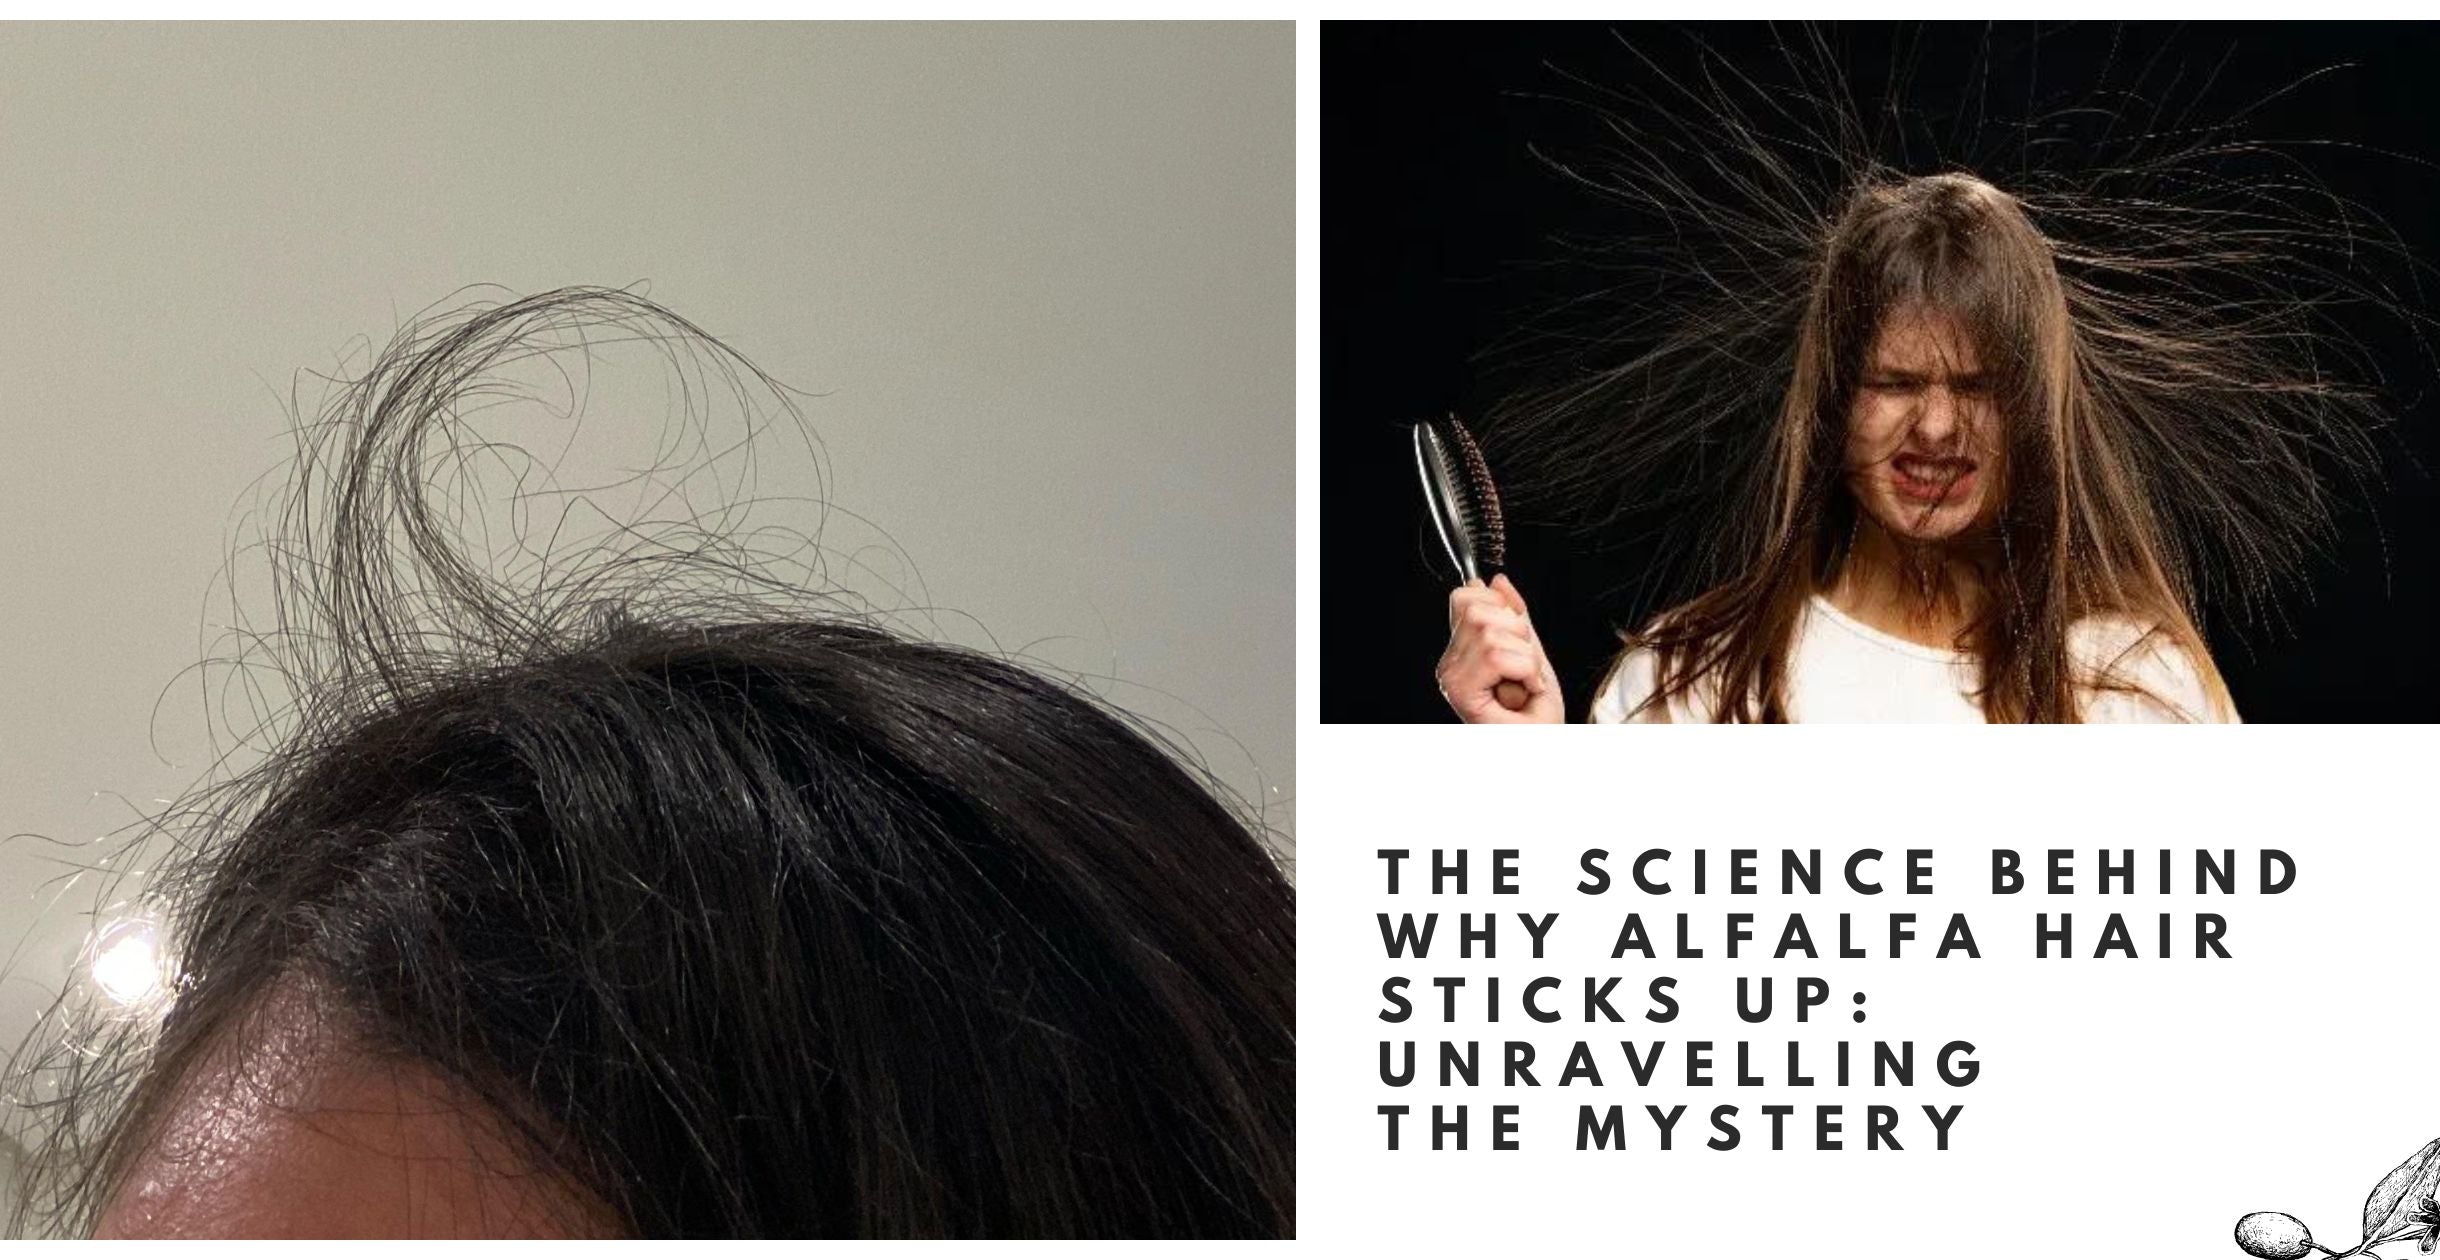 The Science Behind Why Alfalfa Hair Sticks Up: Unravelling the Mystery